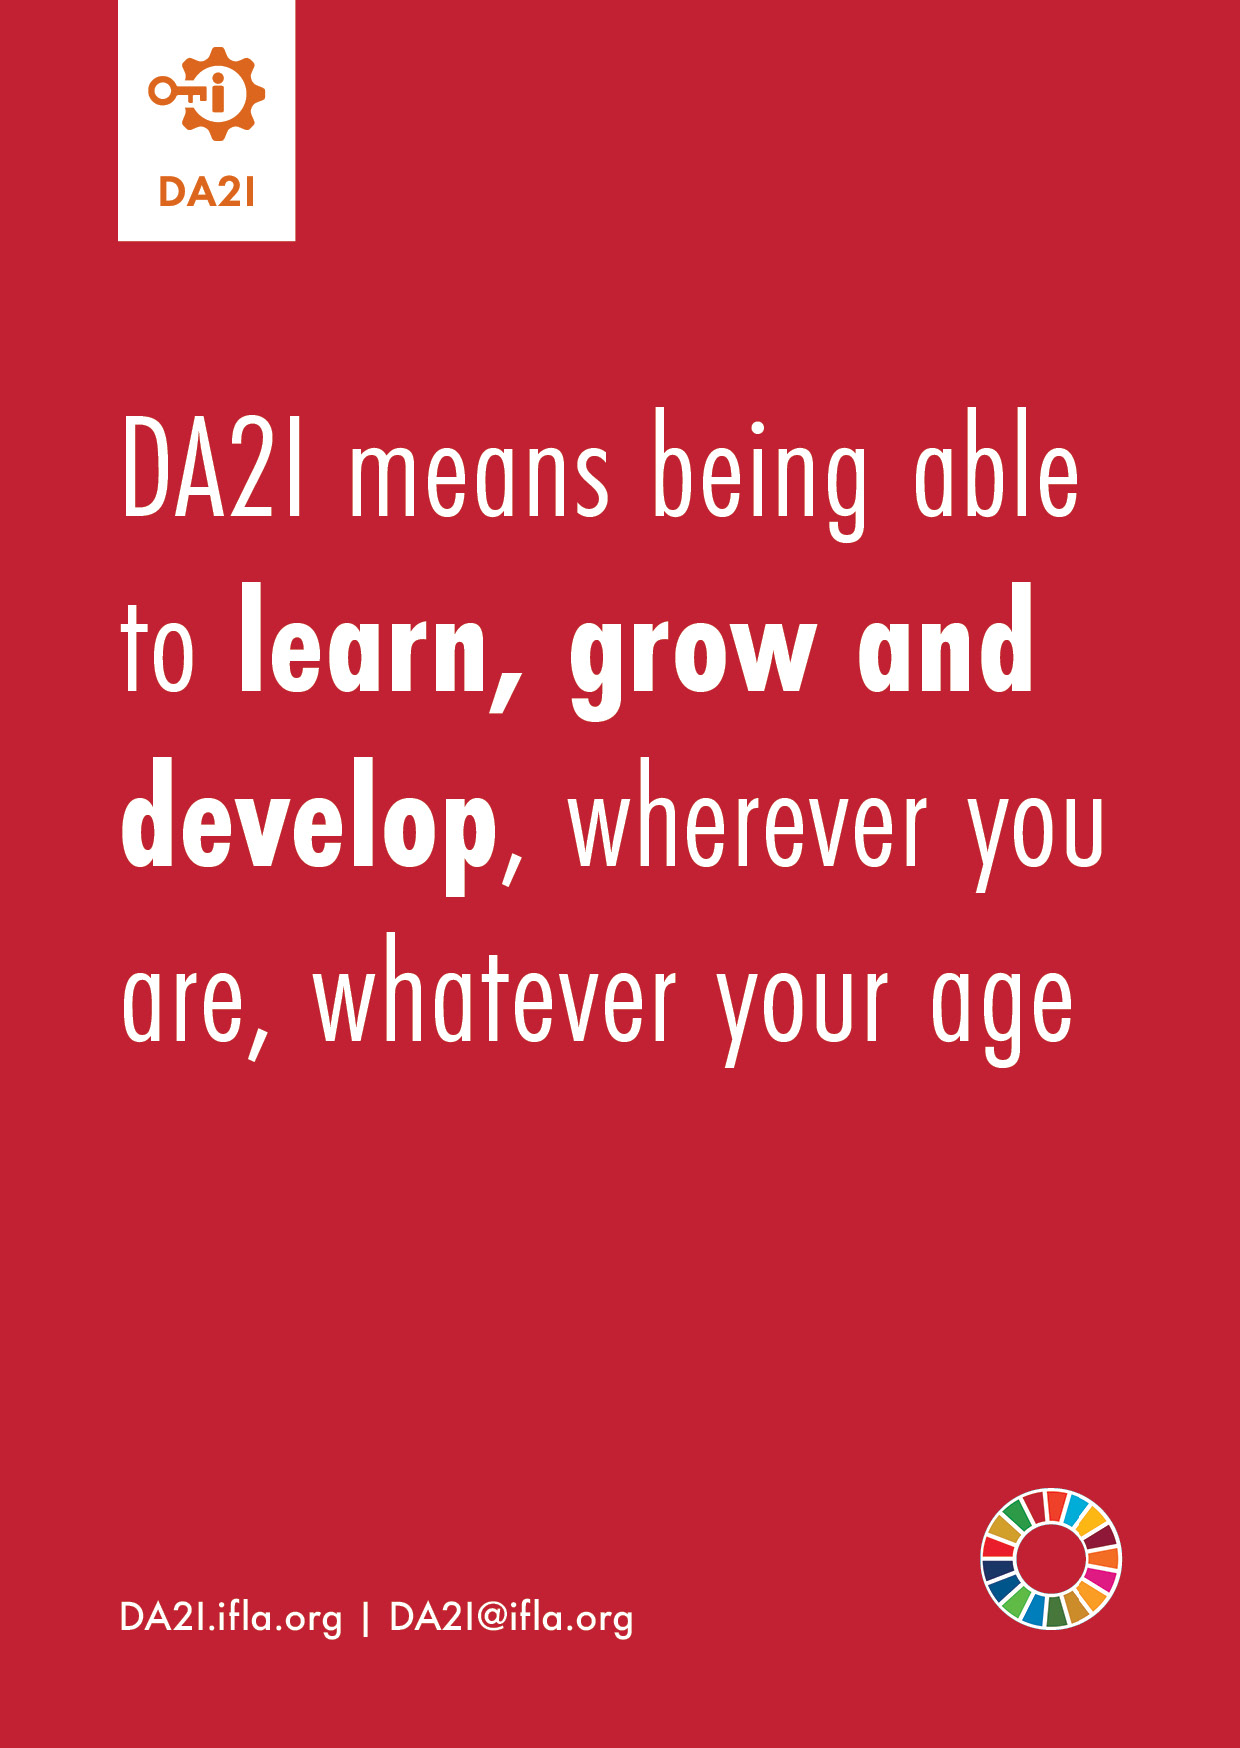 DA2I means being able to learn, grow and develop, wherever you are, whatever your age